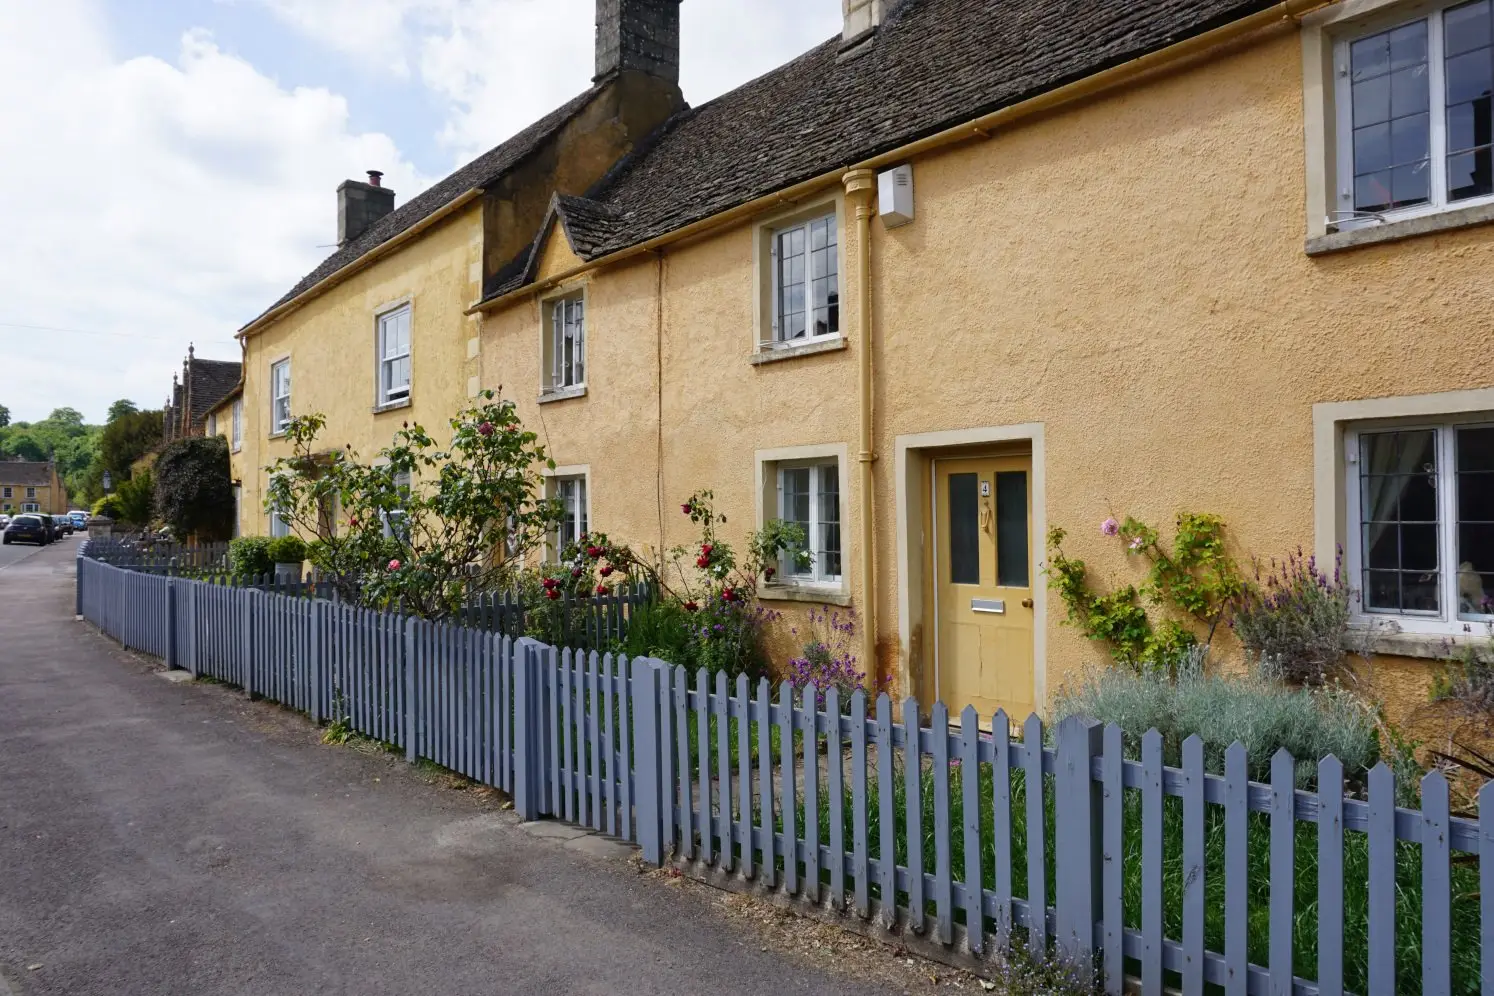 Picturesque cottages painted yellow in the Cotswold village of Badminton near Bath and Bristol